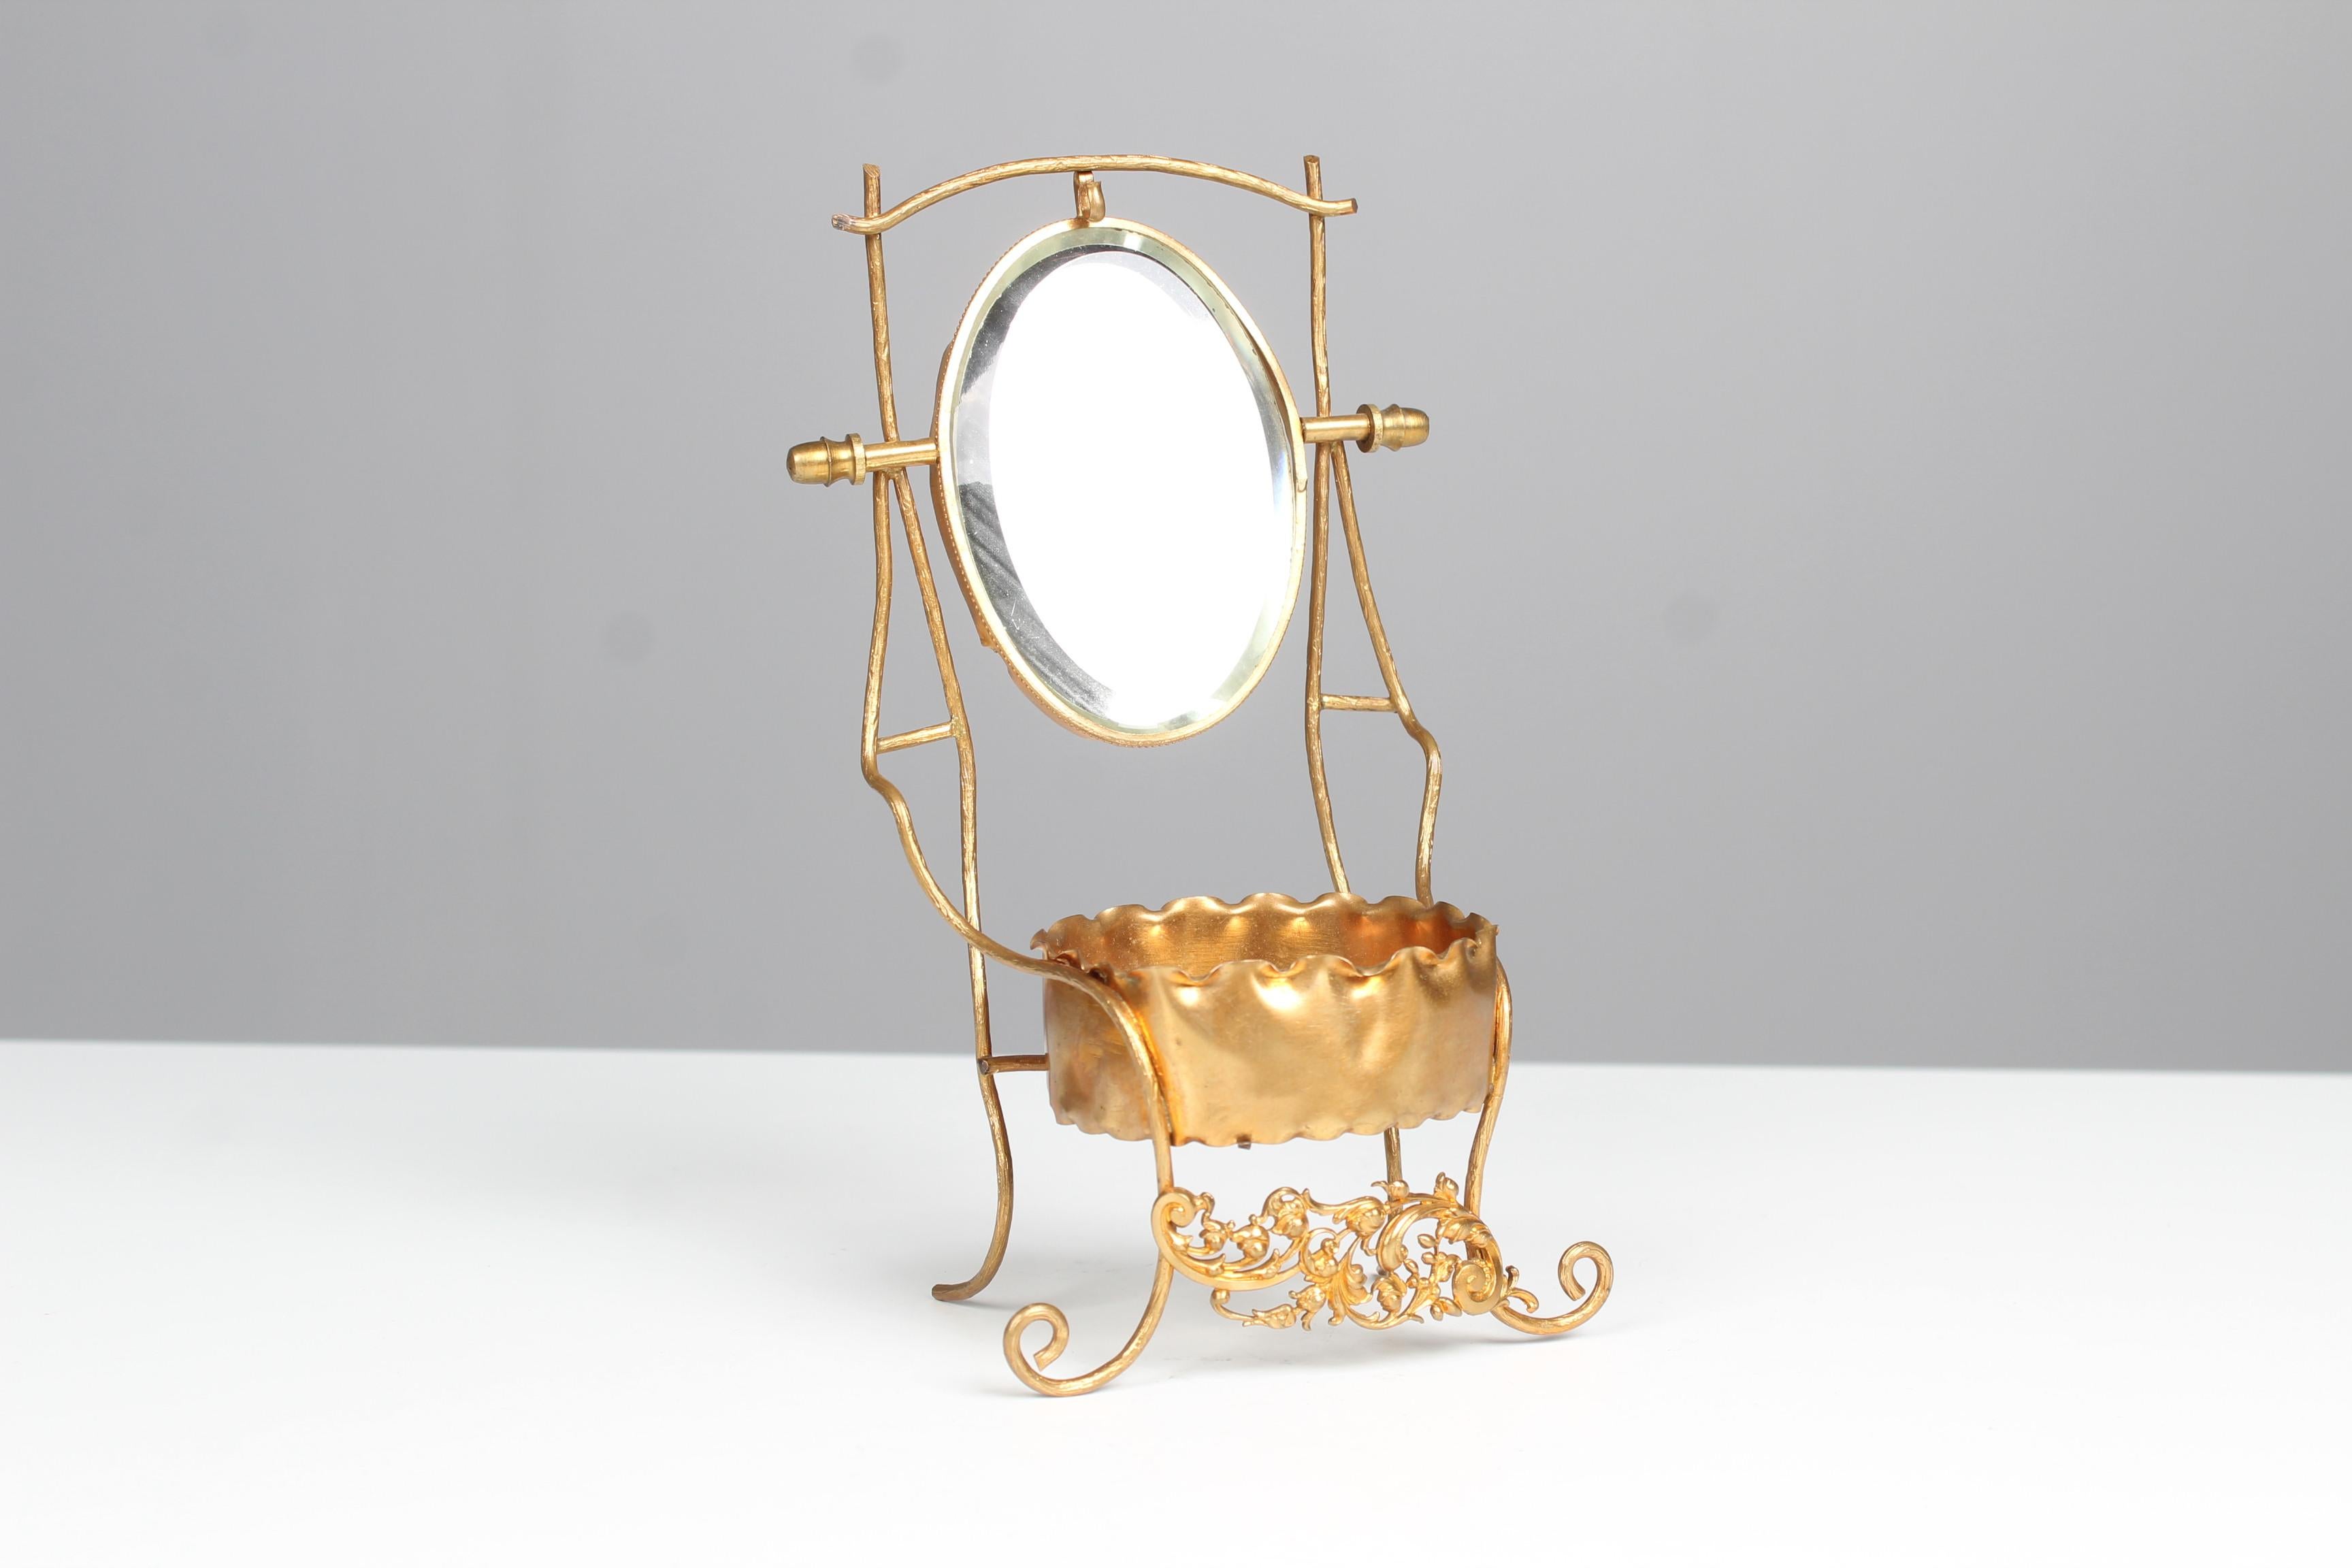 Beautiful antique miniature vanity mirror for jewelry.
France, circa 1920.



